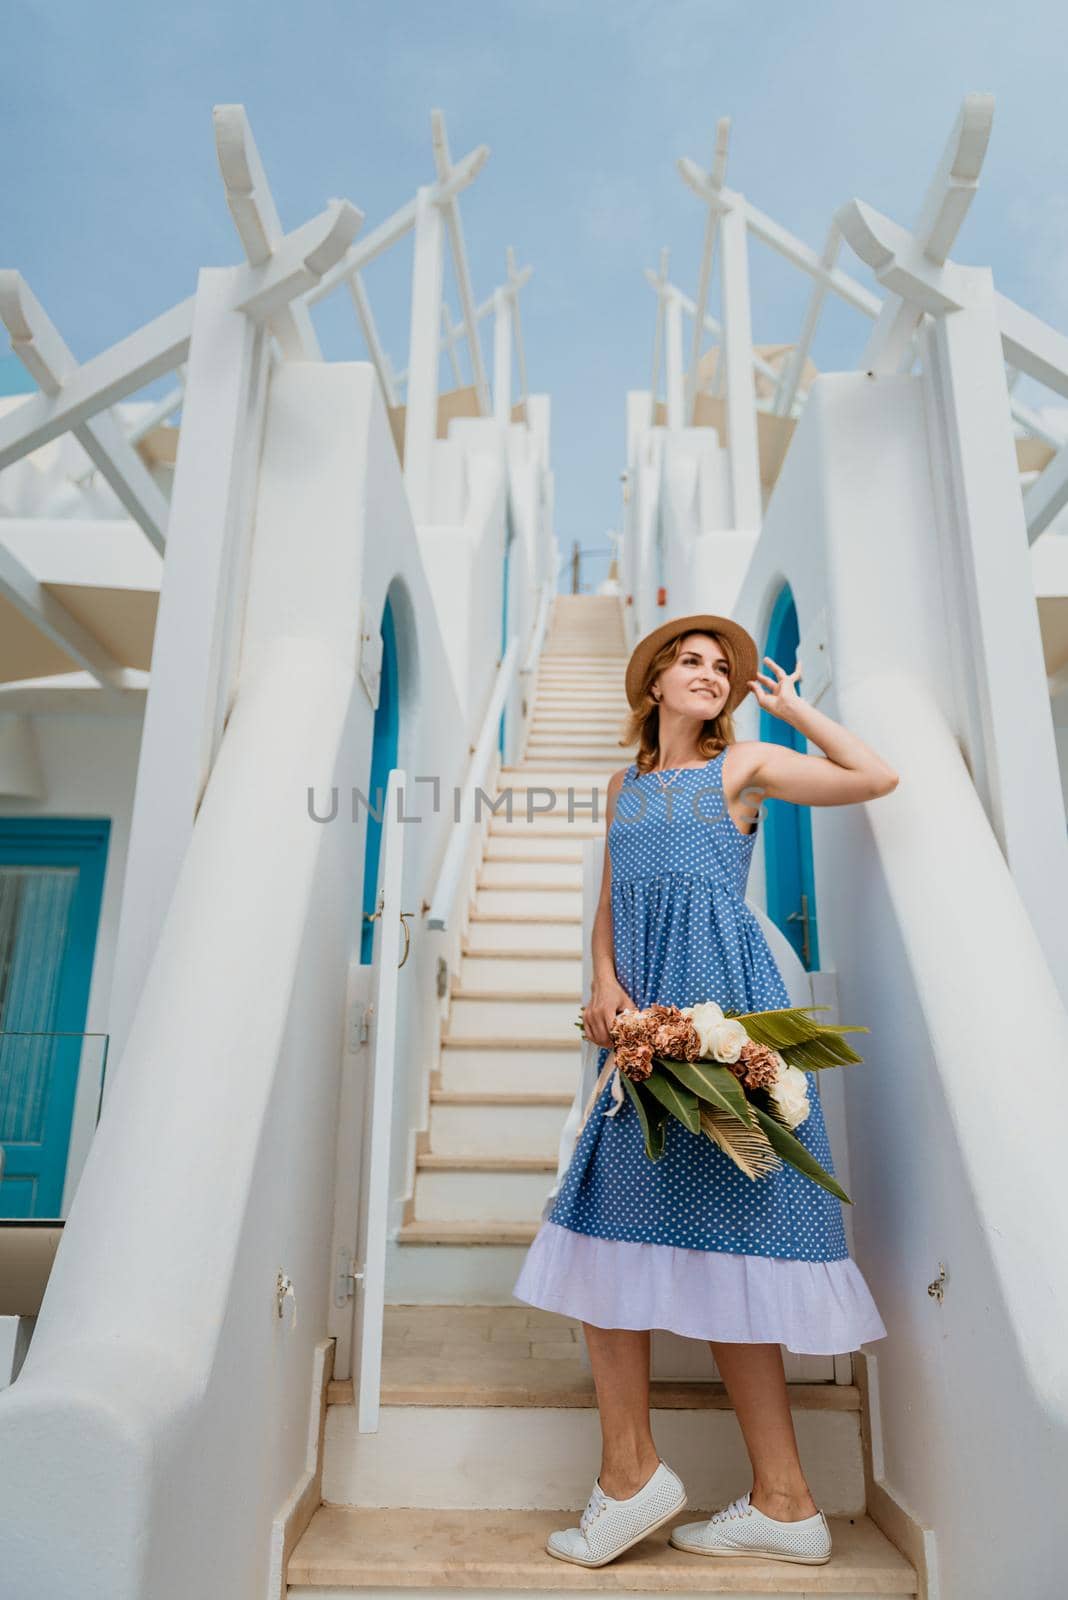 Beautiful girl walking with bouquet of flowers along the street of Santorini island, an old European town, Greece. Portrait of a tourist girl walking on the street background. Love story summer vacation by Andrii_Ko